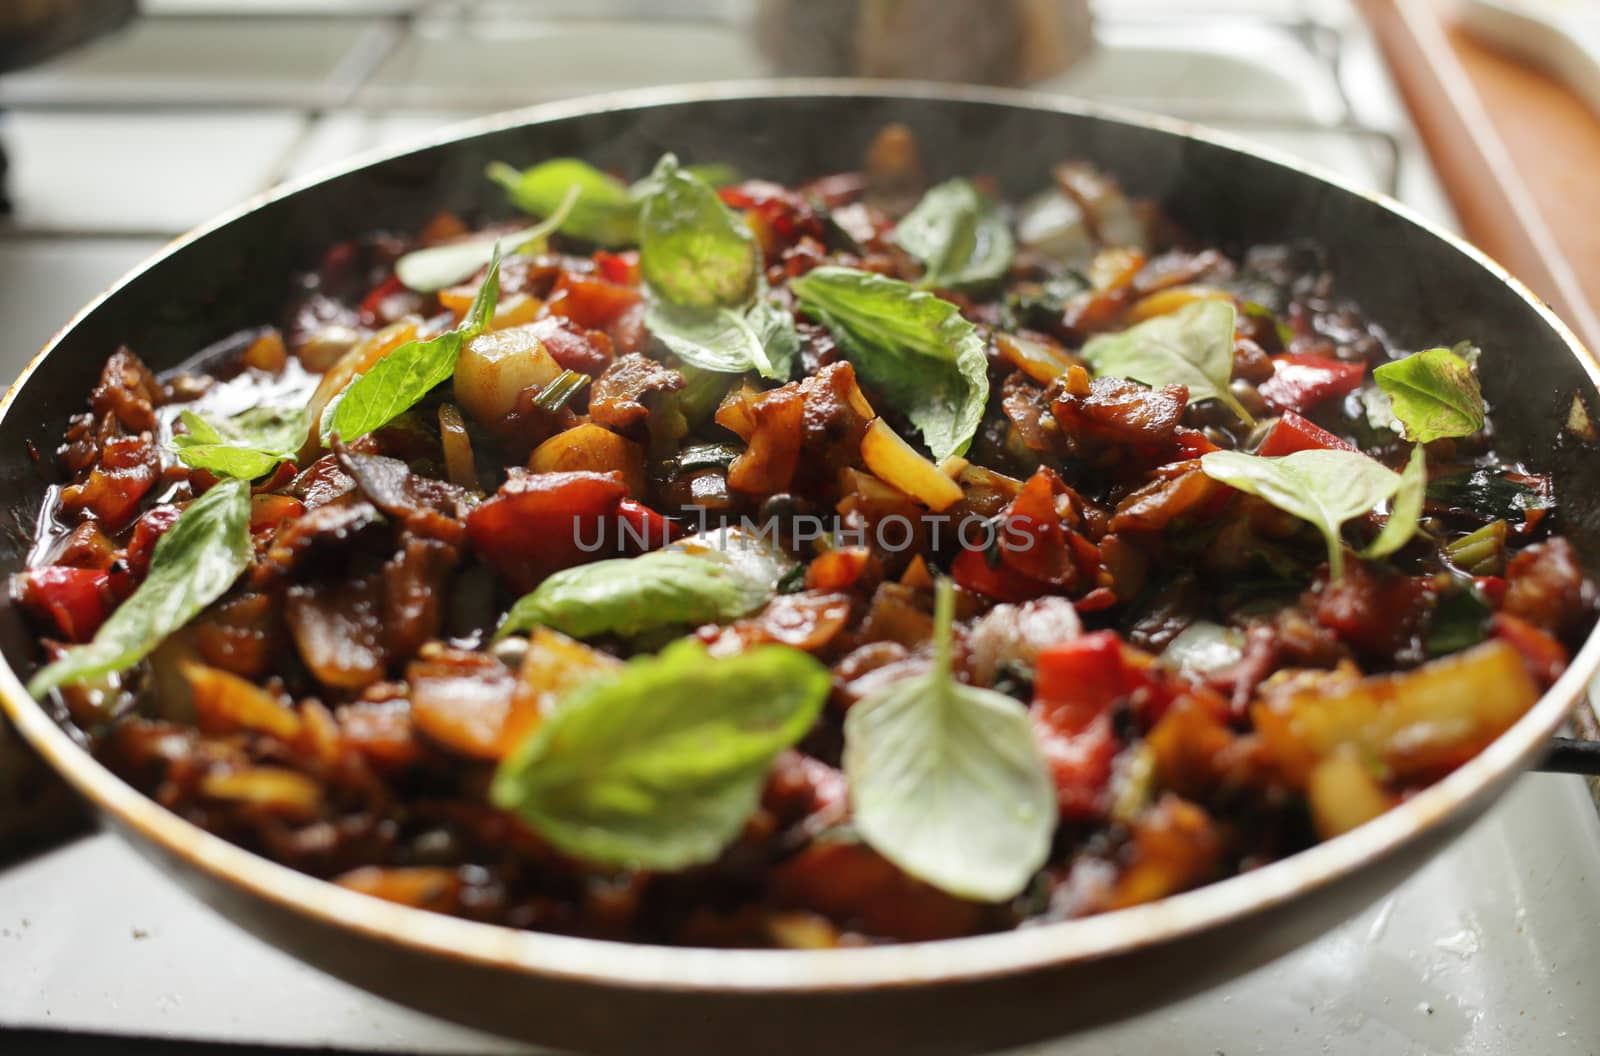 Healthy food vegetables are fried in a pan Tomato eggplant onion pepper zucchini by selinsmo